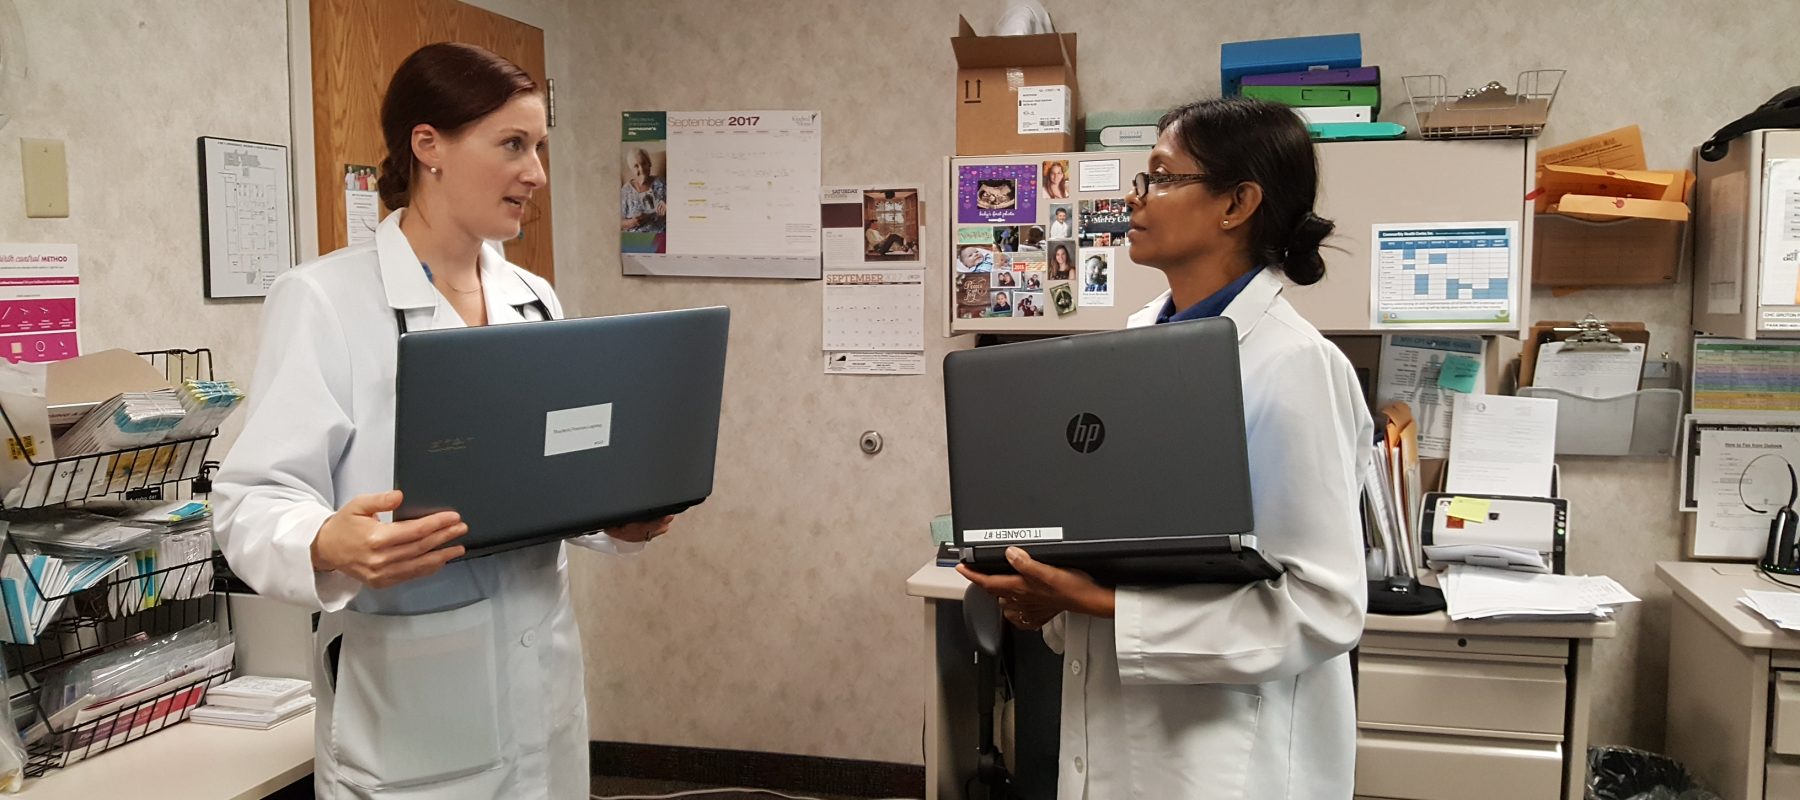 Two women in white coats talking to each other holding laptops in a doctors office